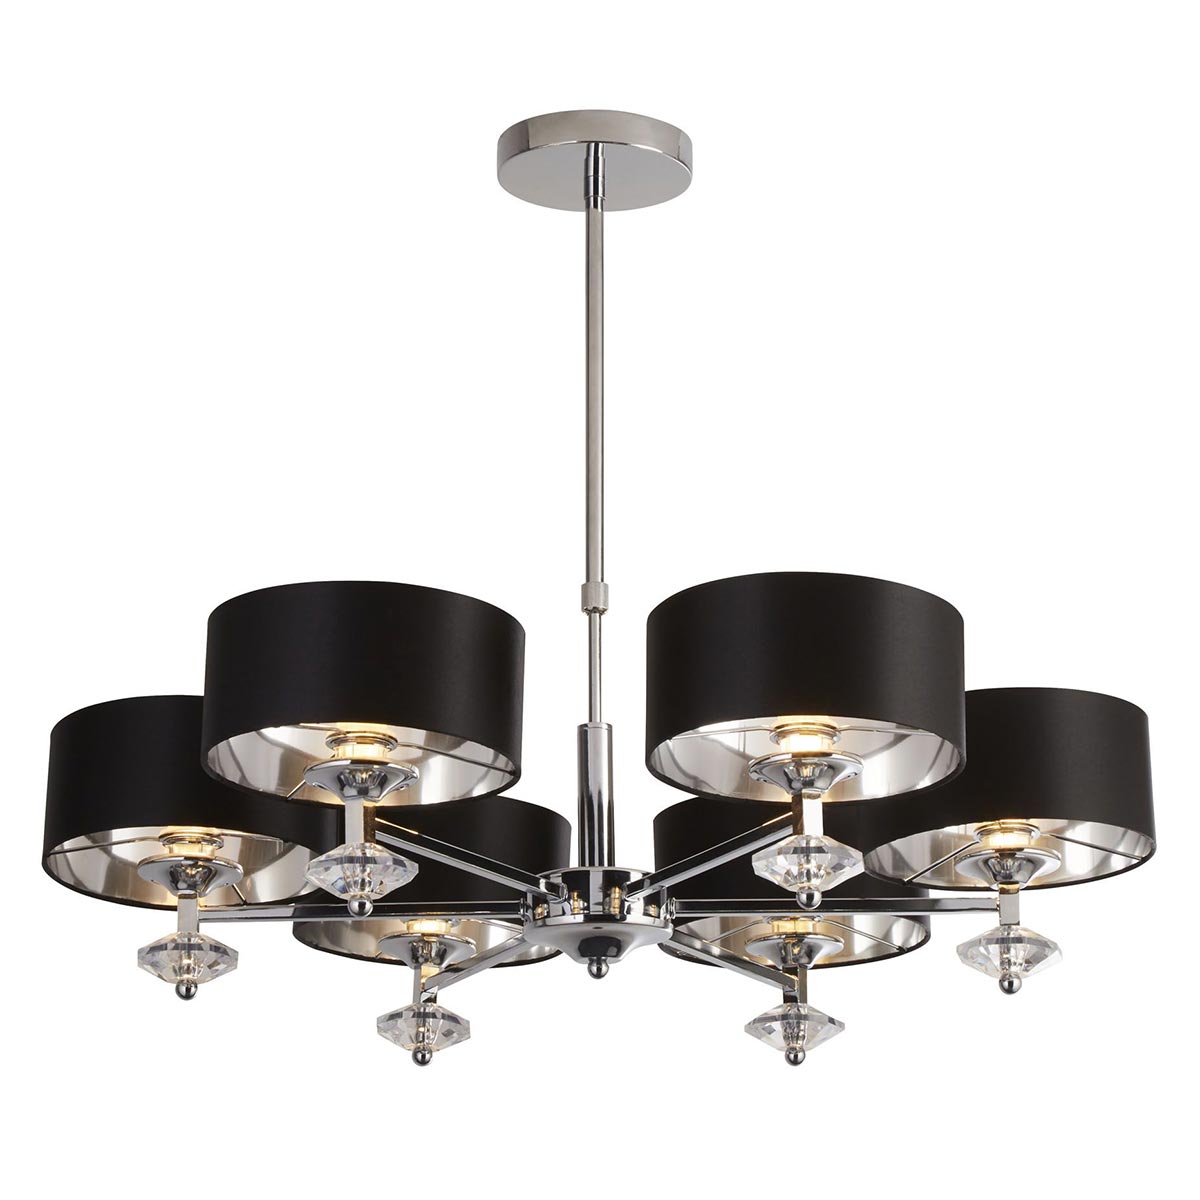 New Orleans Chrome 6 Light Telescopic Chandelier Lined Black Shades